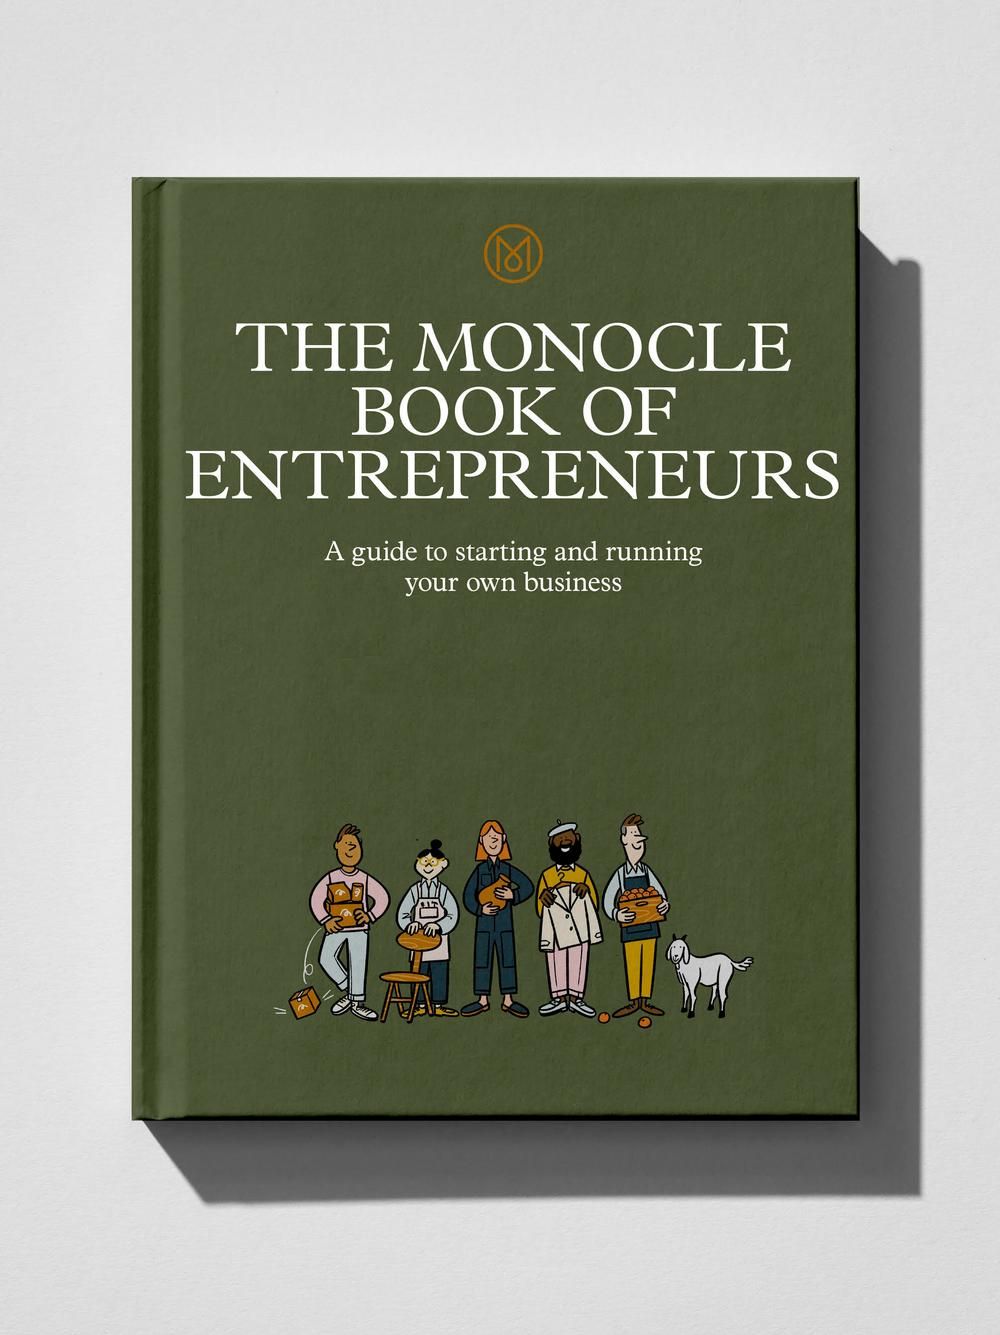 (Eng) The Monocle Book of Entrepreneurs (Hardcover) / Tyler Brule, Andrew Tuck, Joe Pickard (Author)